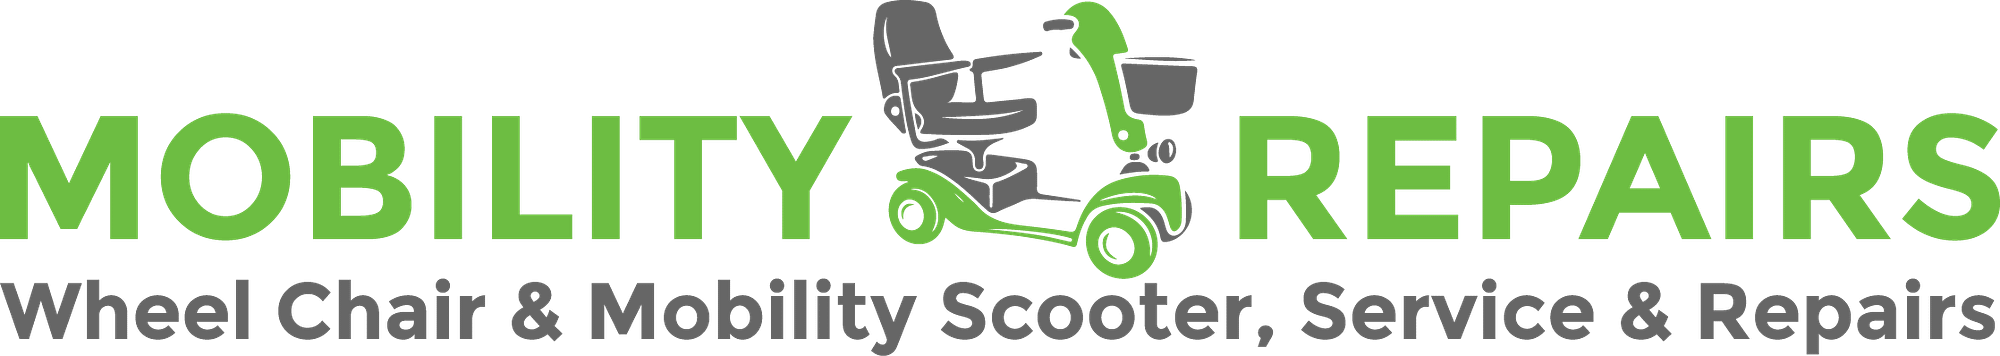 Mobility Repairs - wheel chair & mobility scooter service and repairs.